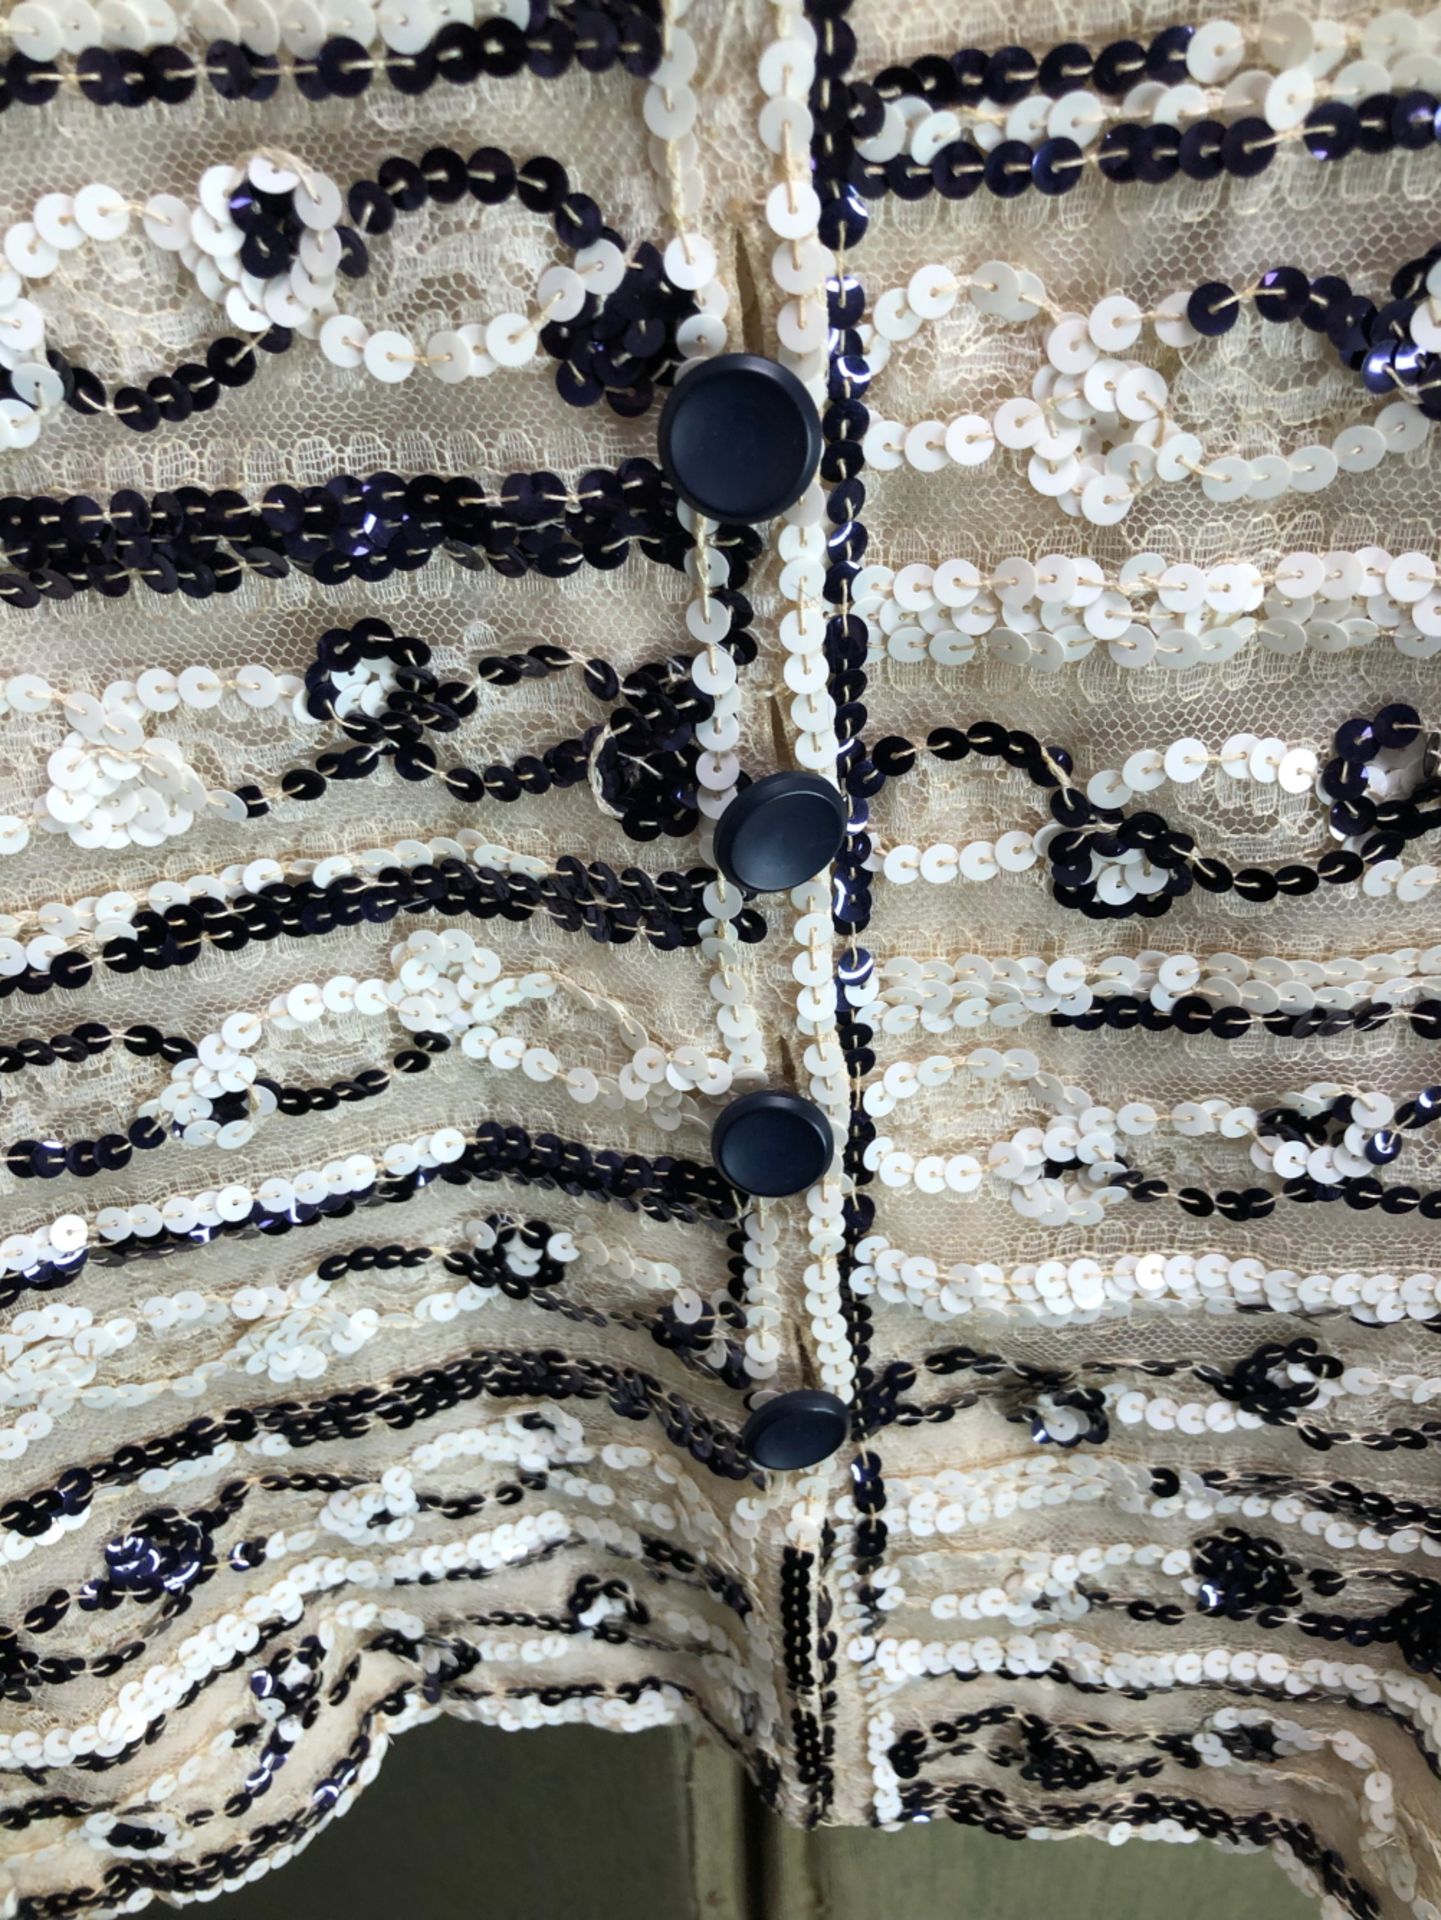 VINTAGE 1970's CHANEL HAUTE COUTURE EMBELLISHED SILK NAVY AND CREAM JACKET. PIT TO PIT 44.5cm - Image 5 of 31